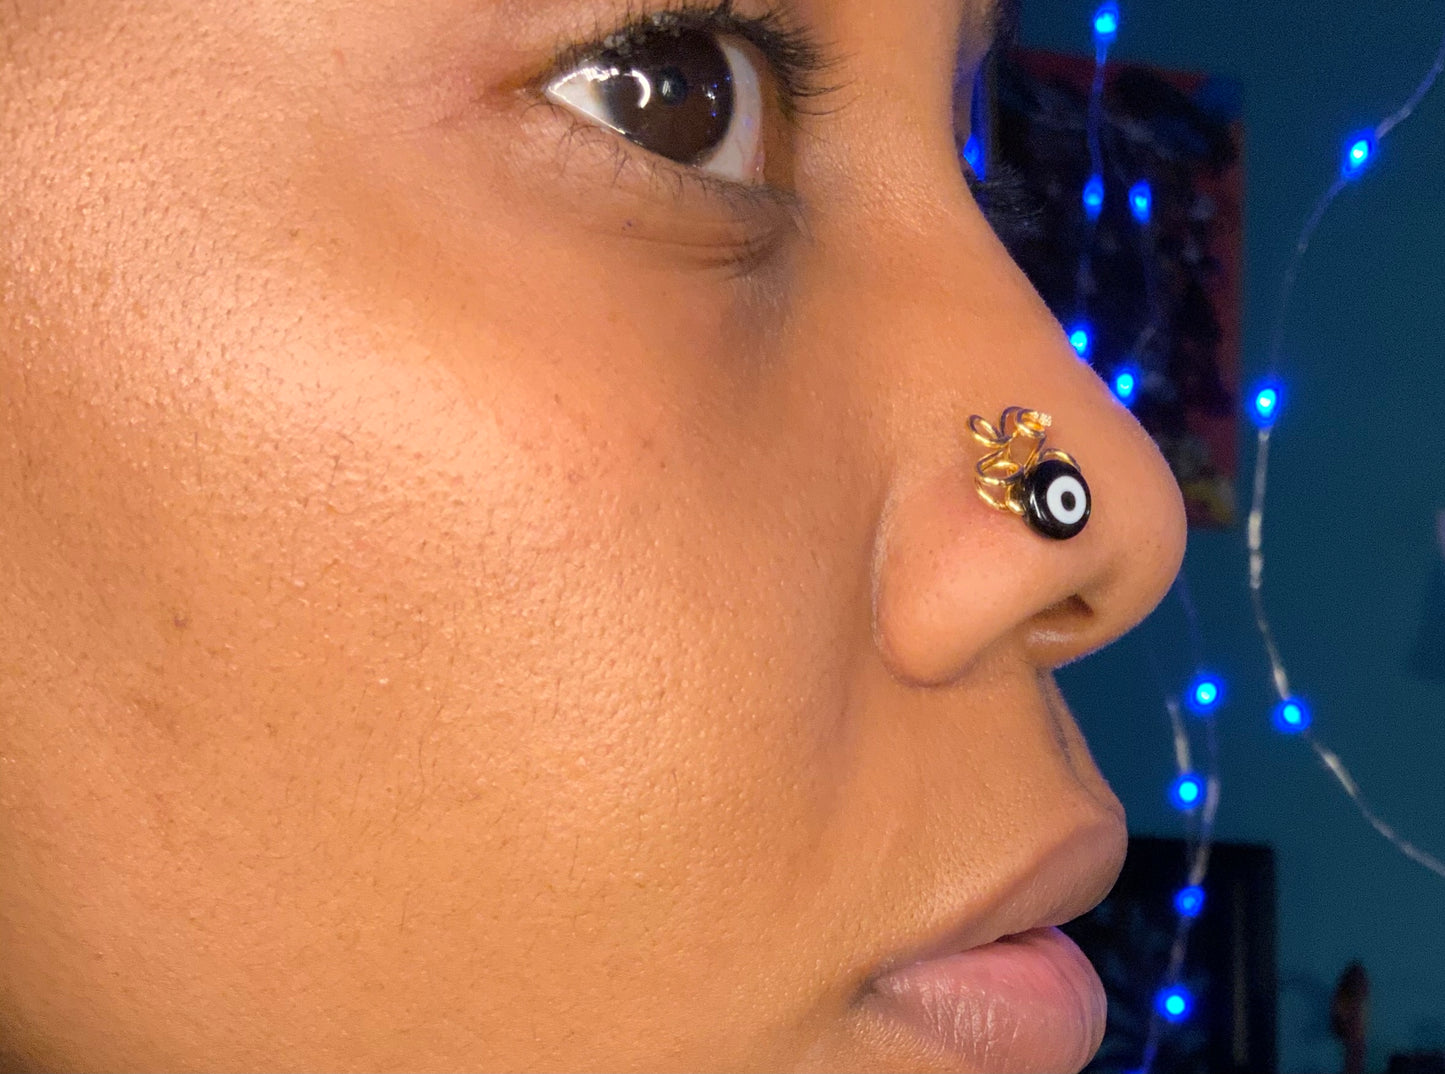 Eye Abstract Nose Stud (pierced noses only)